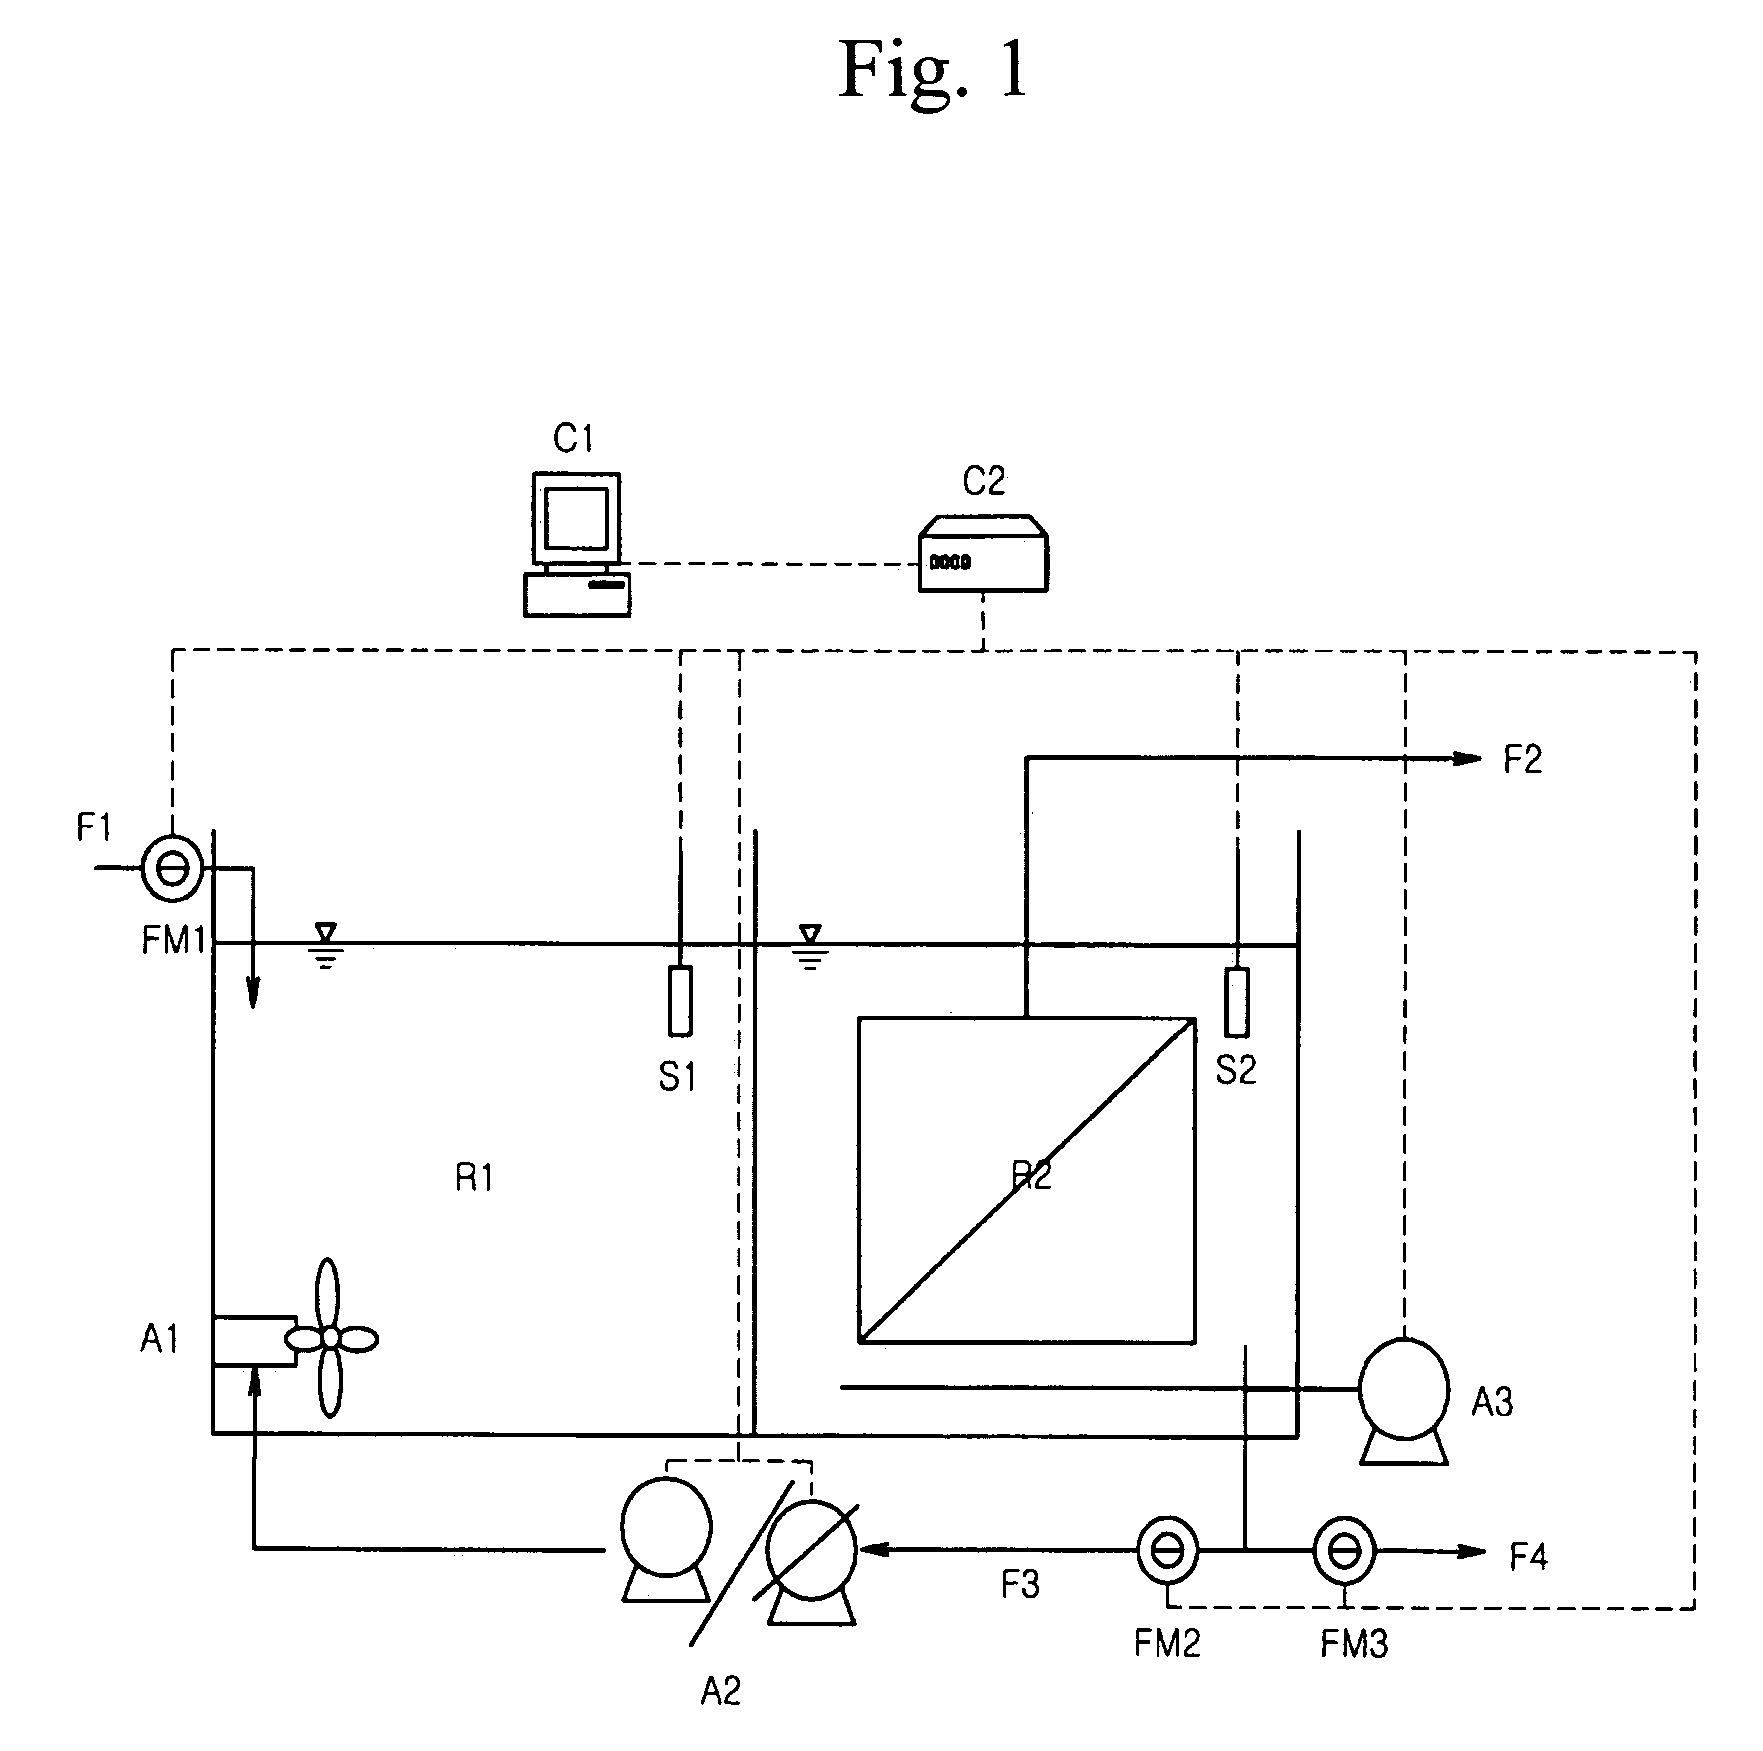 Membrane coupled activated sludge method and apparatus operating anoxic/anaerobic process alternately for removal of nitrogen and phosphorous